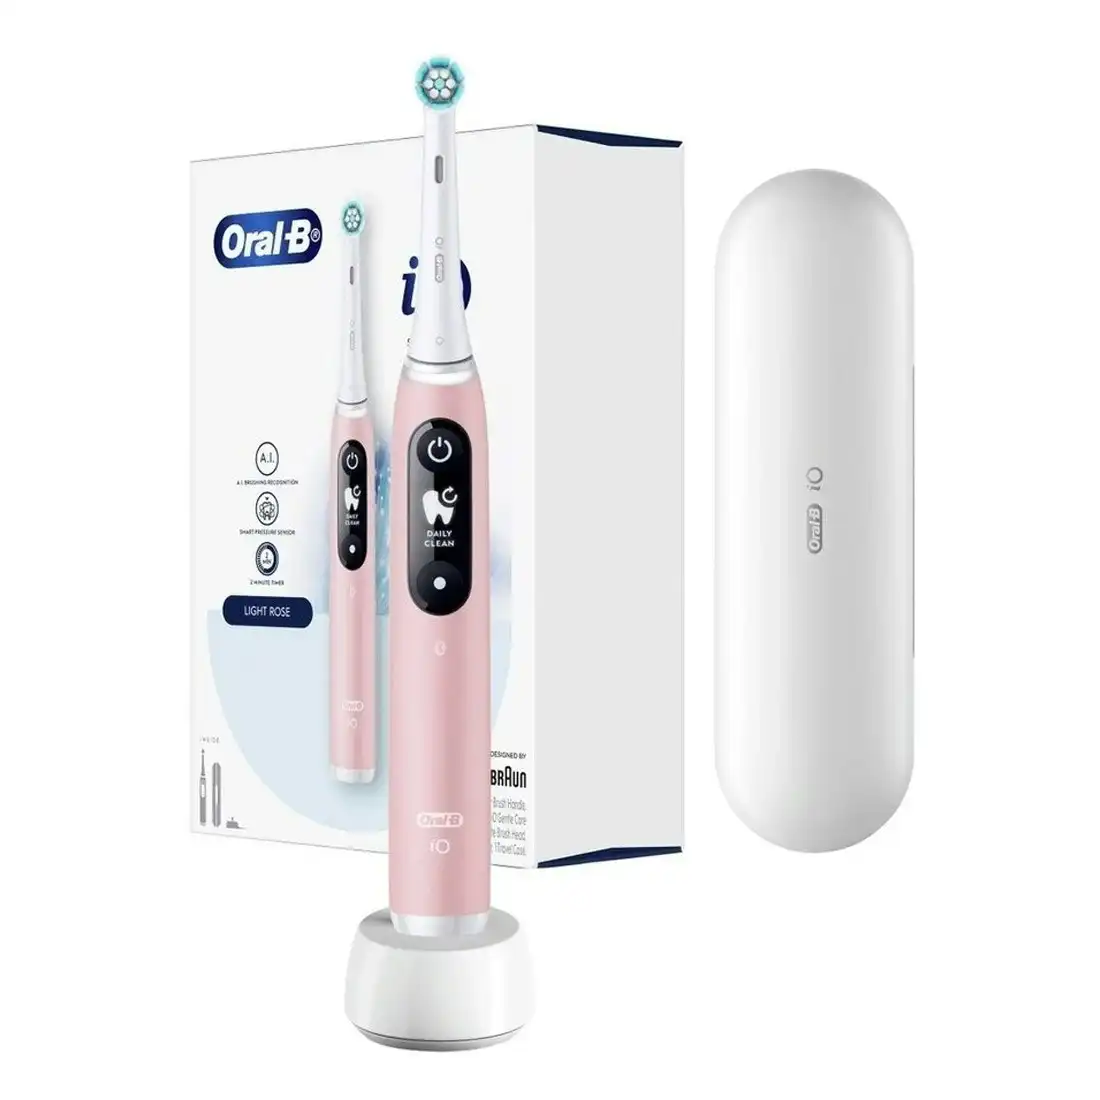 Oral-B iO 6 Series Rechargeable Toothbrush - Light Rose